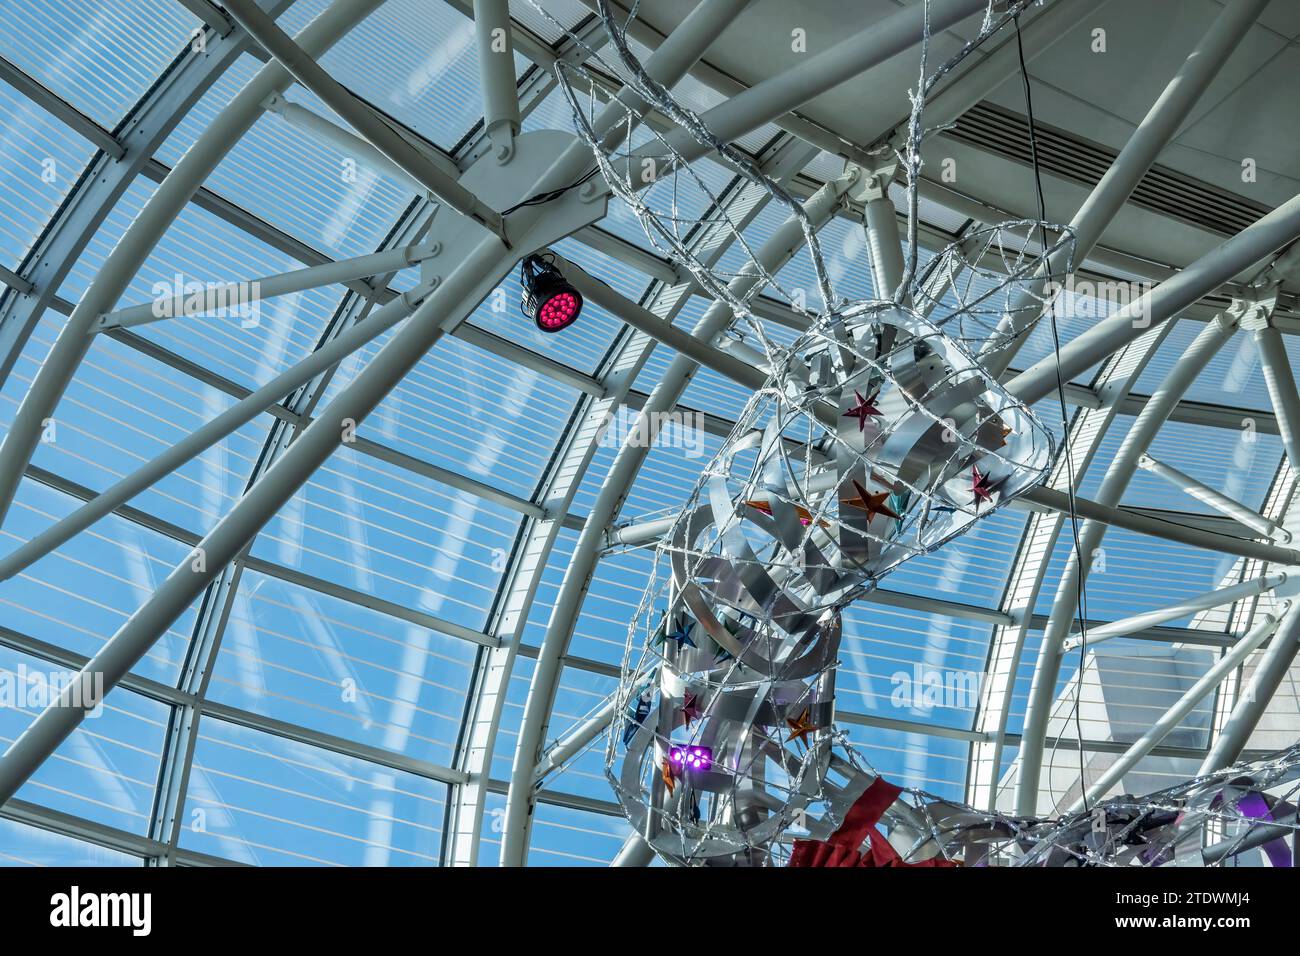 Looking up at the giant modern reindeer statue during Christmas at Charlotte Douglas International Airport in Charlotte, North Carolina. Stock Photo